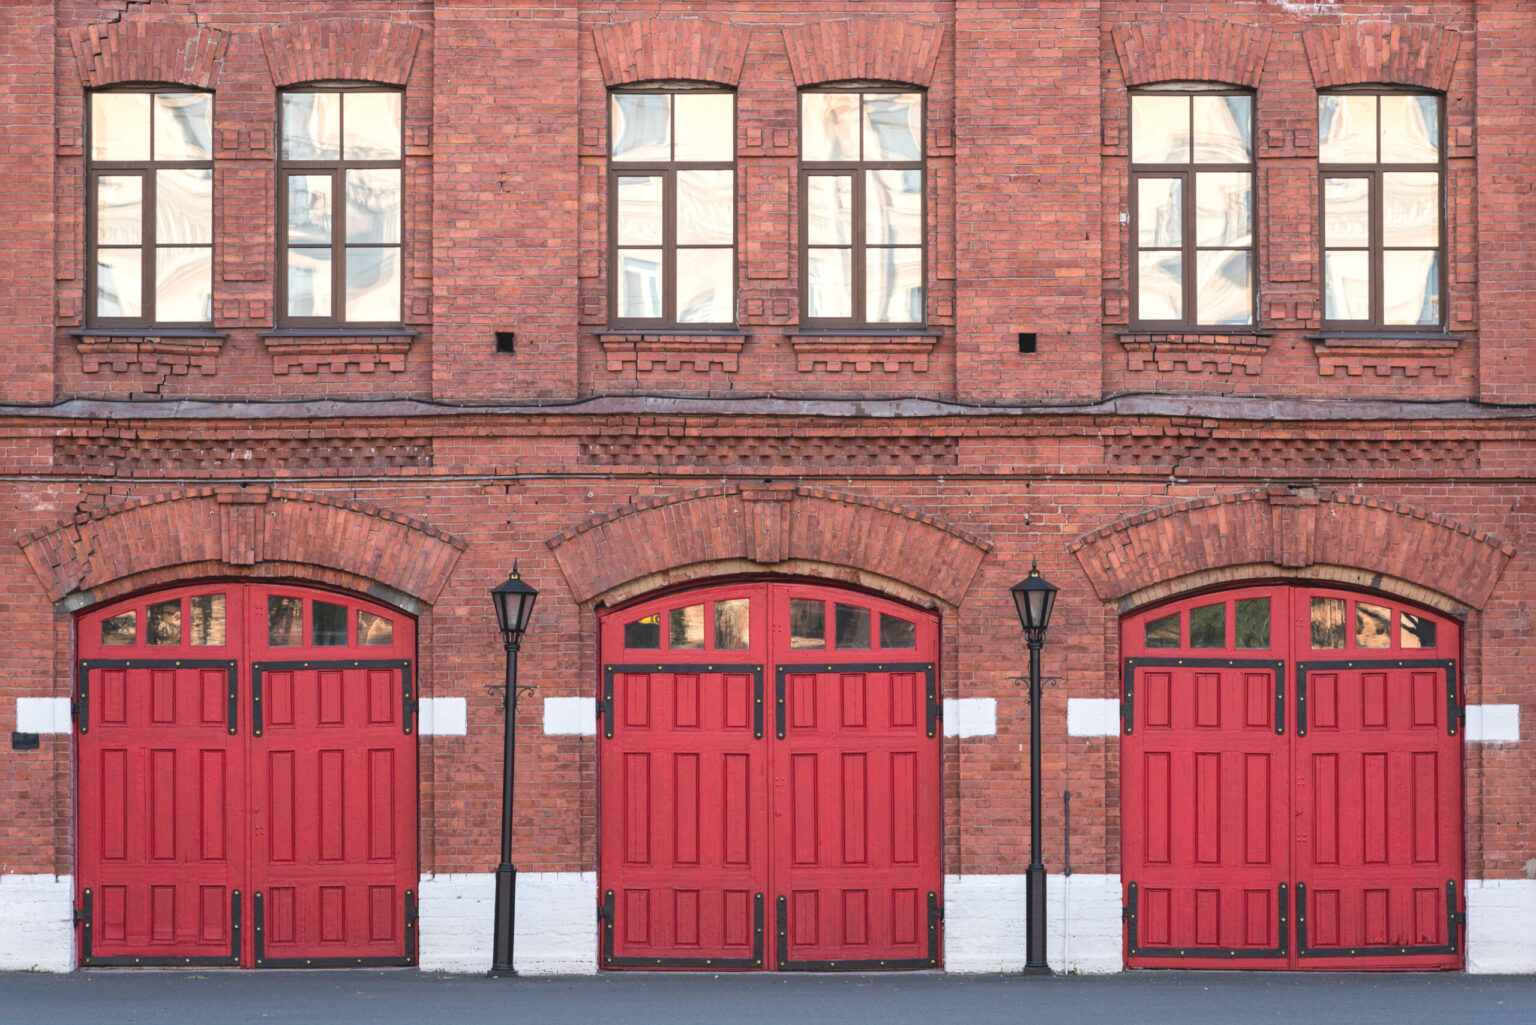 Fire,Station,,An,Old,Historic,Brick,Building,(1880s),With,Red